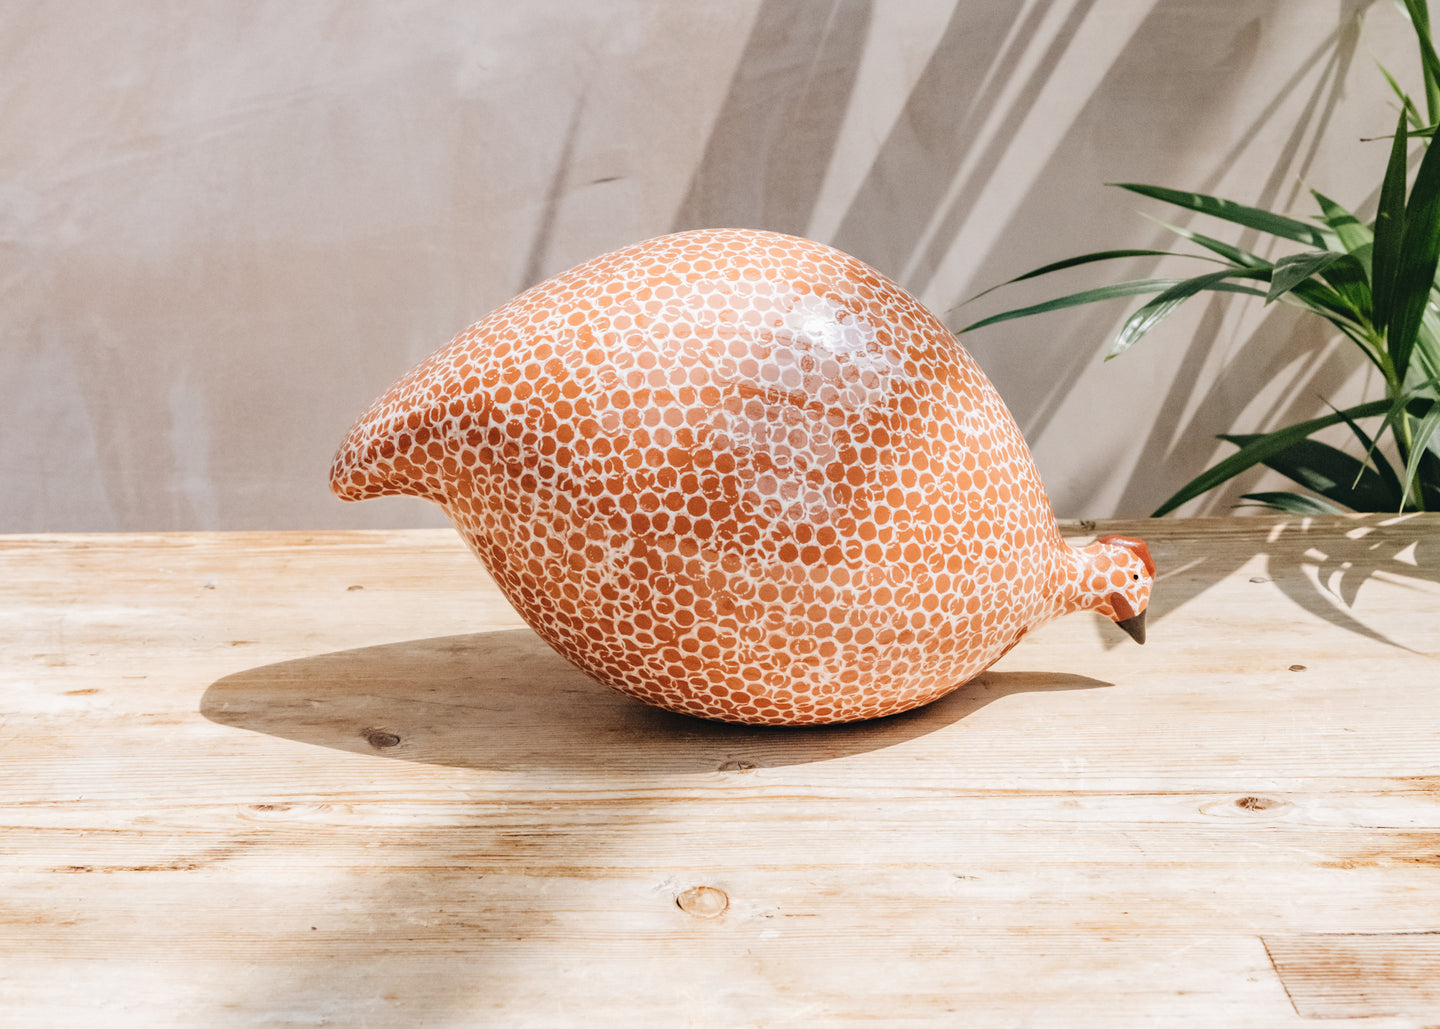 Pecking Ceramic Guinea Fowl in Red Spotted White